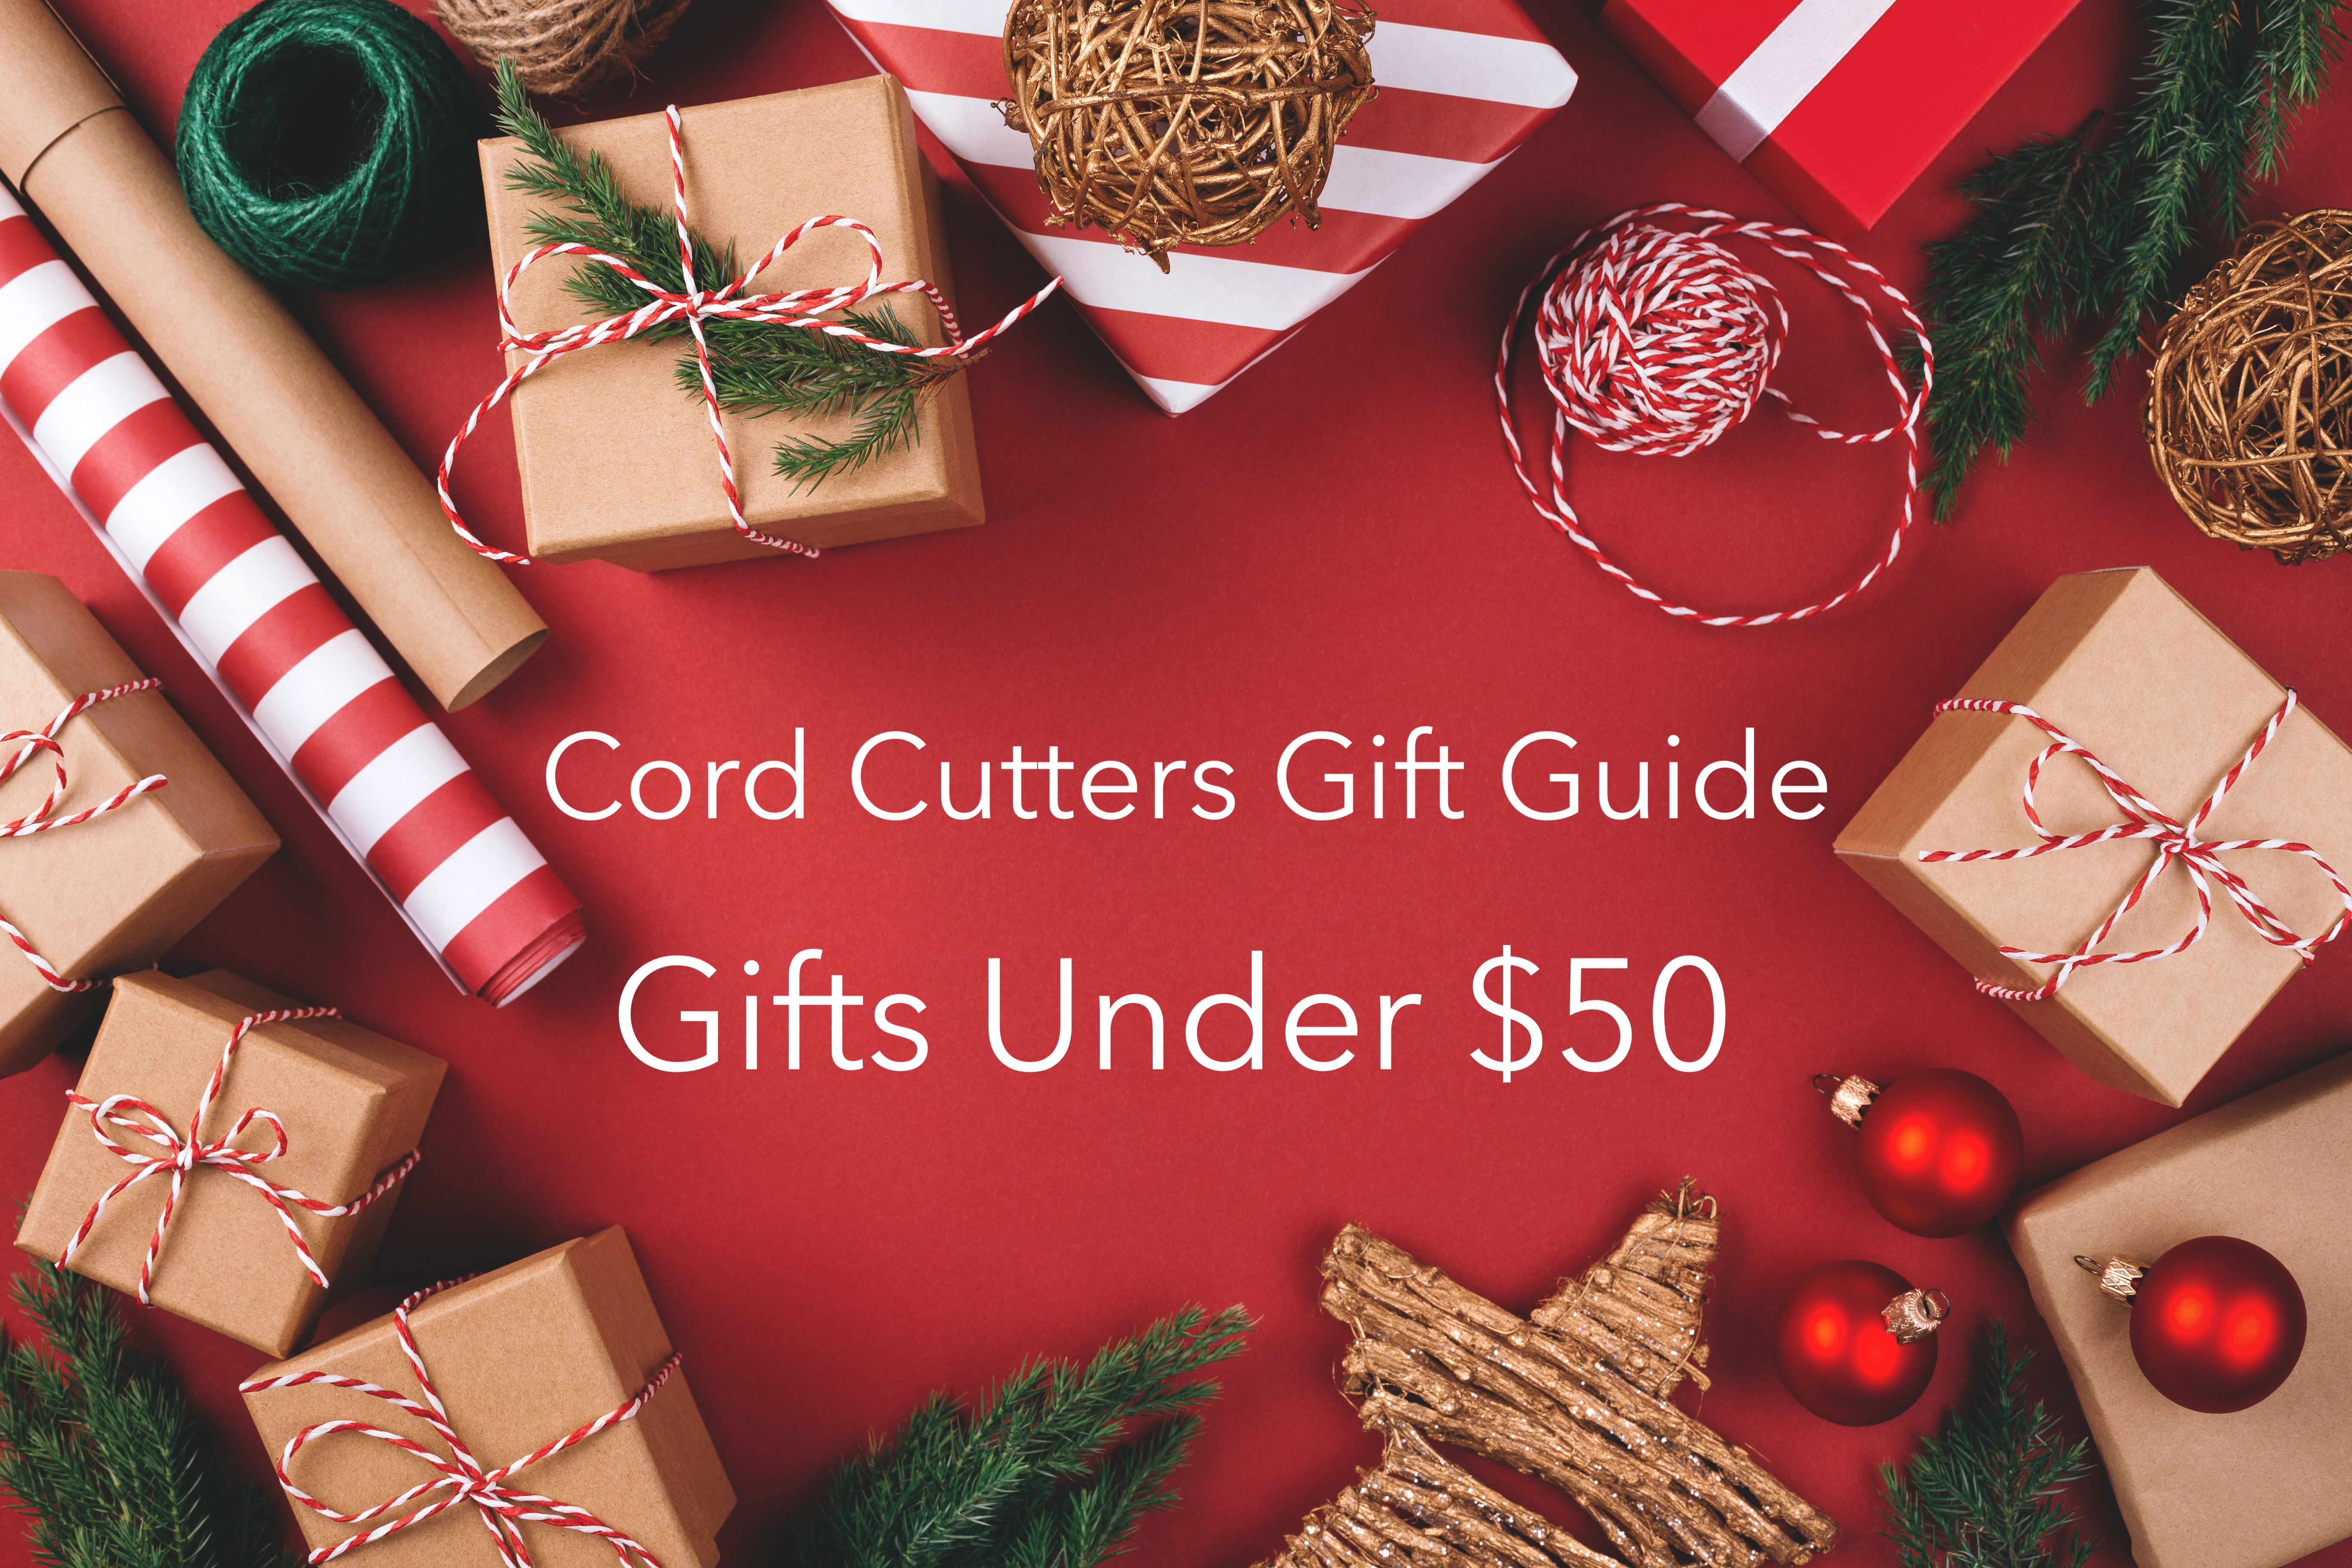 Best Gifts Under $50 for Cord Cutters 2020